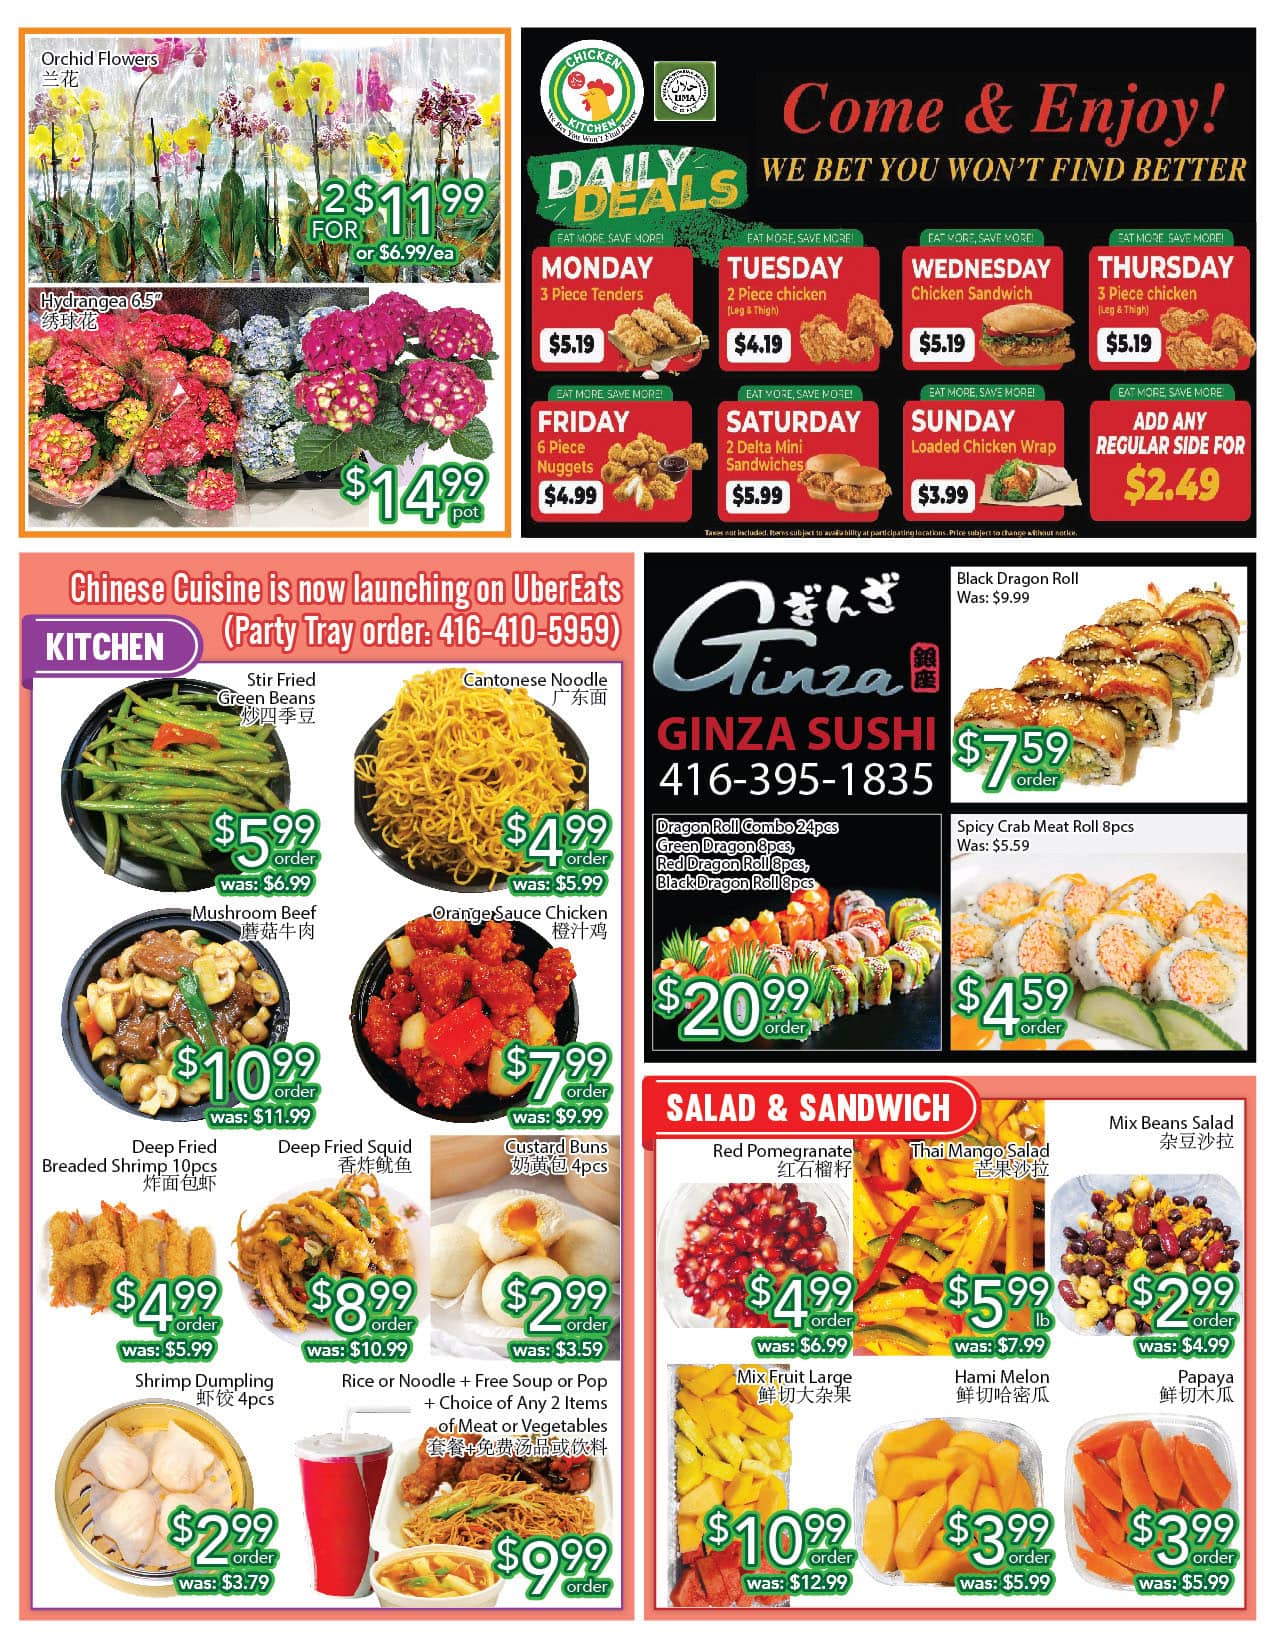 Ample Food Market - Toronto York Store - Weekly Flyer Specials - Page 3